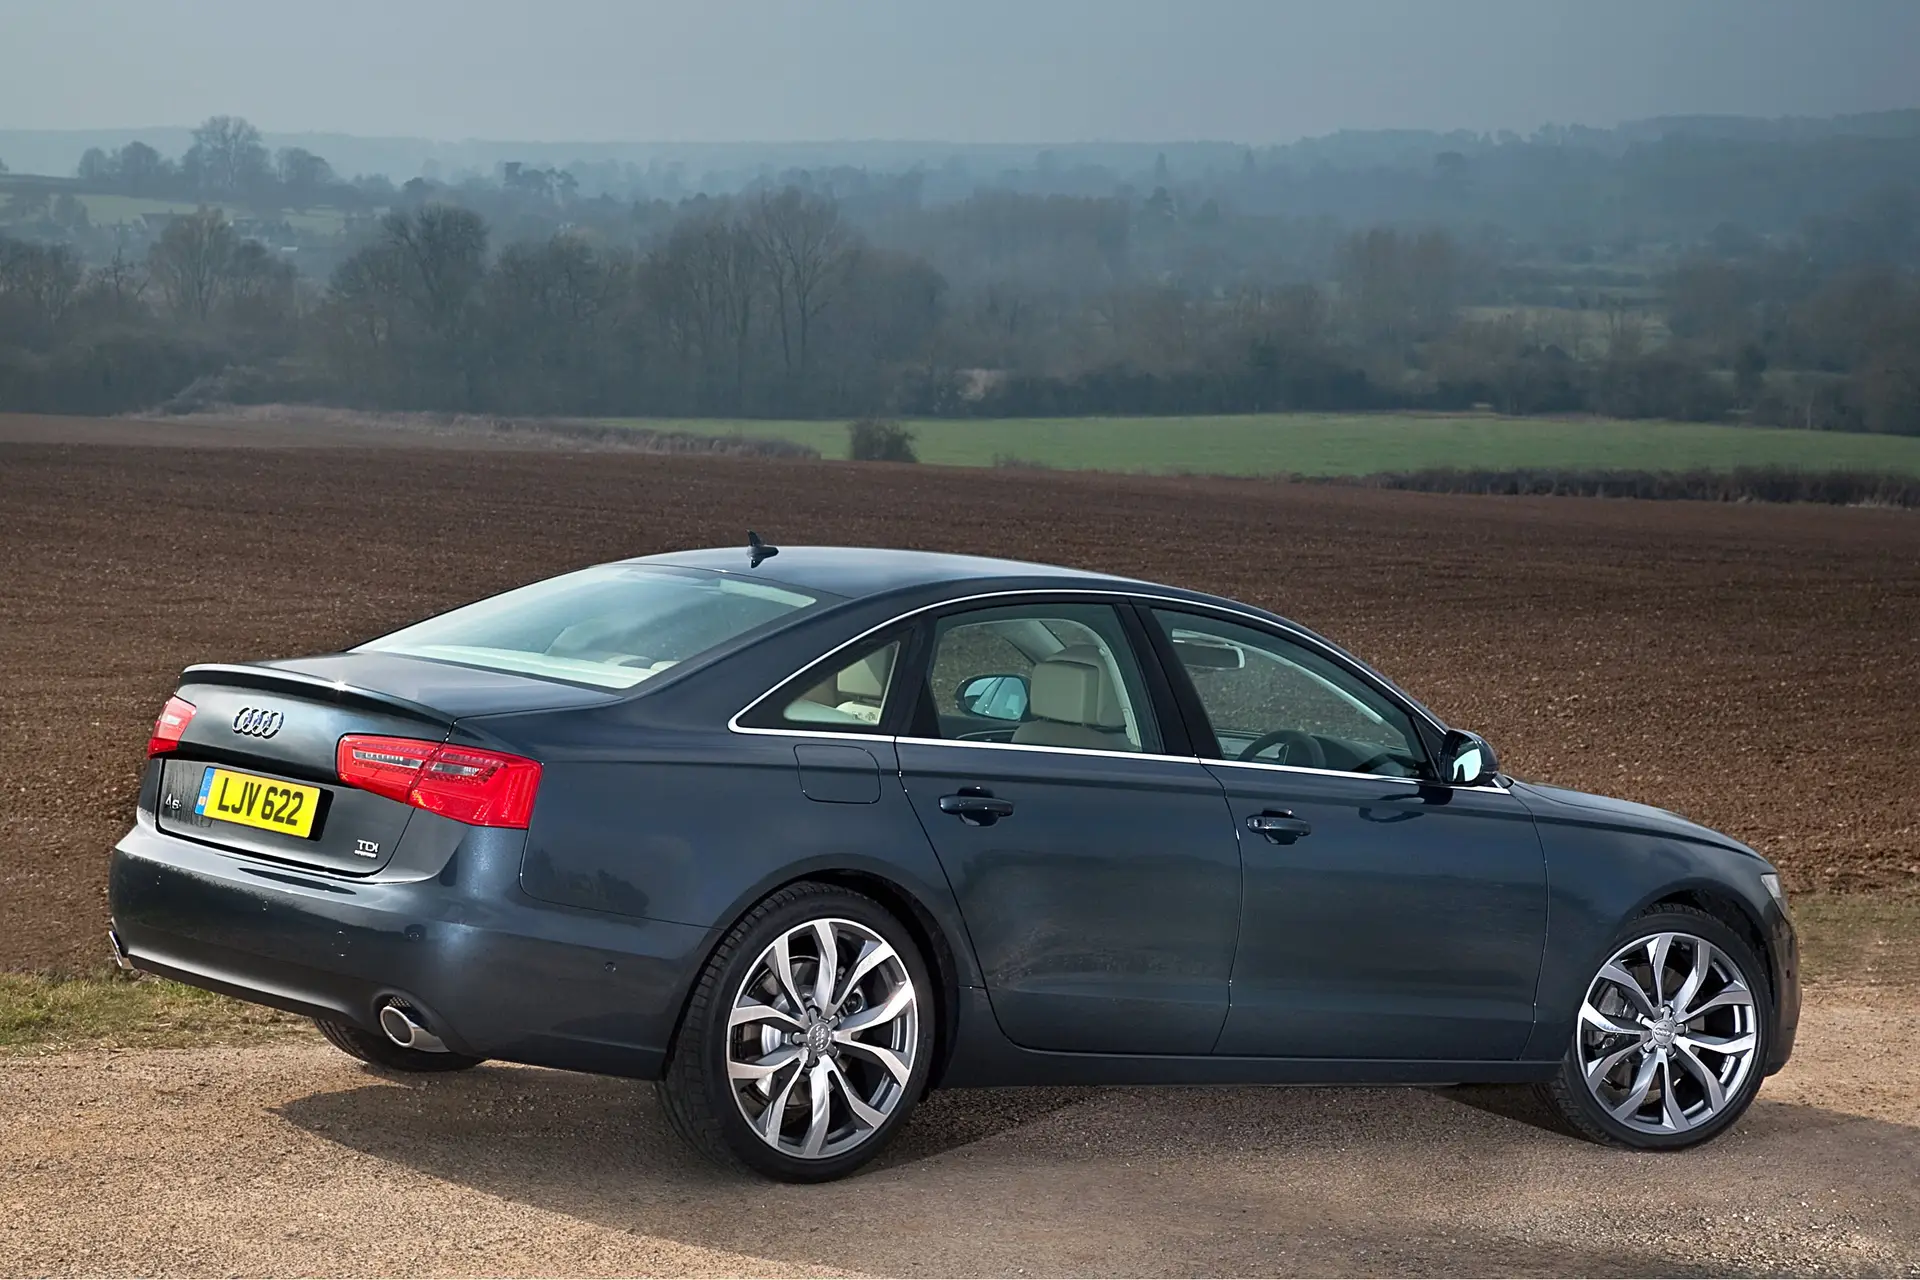 Used Audi A6 (2011-2018) Review: Exterior rear three quarter photo of the Audi A6 